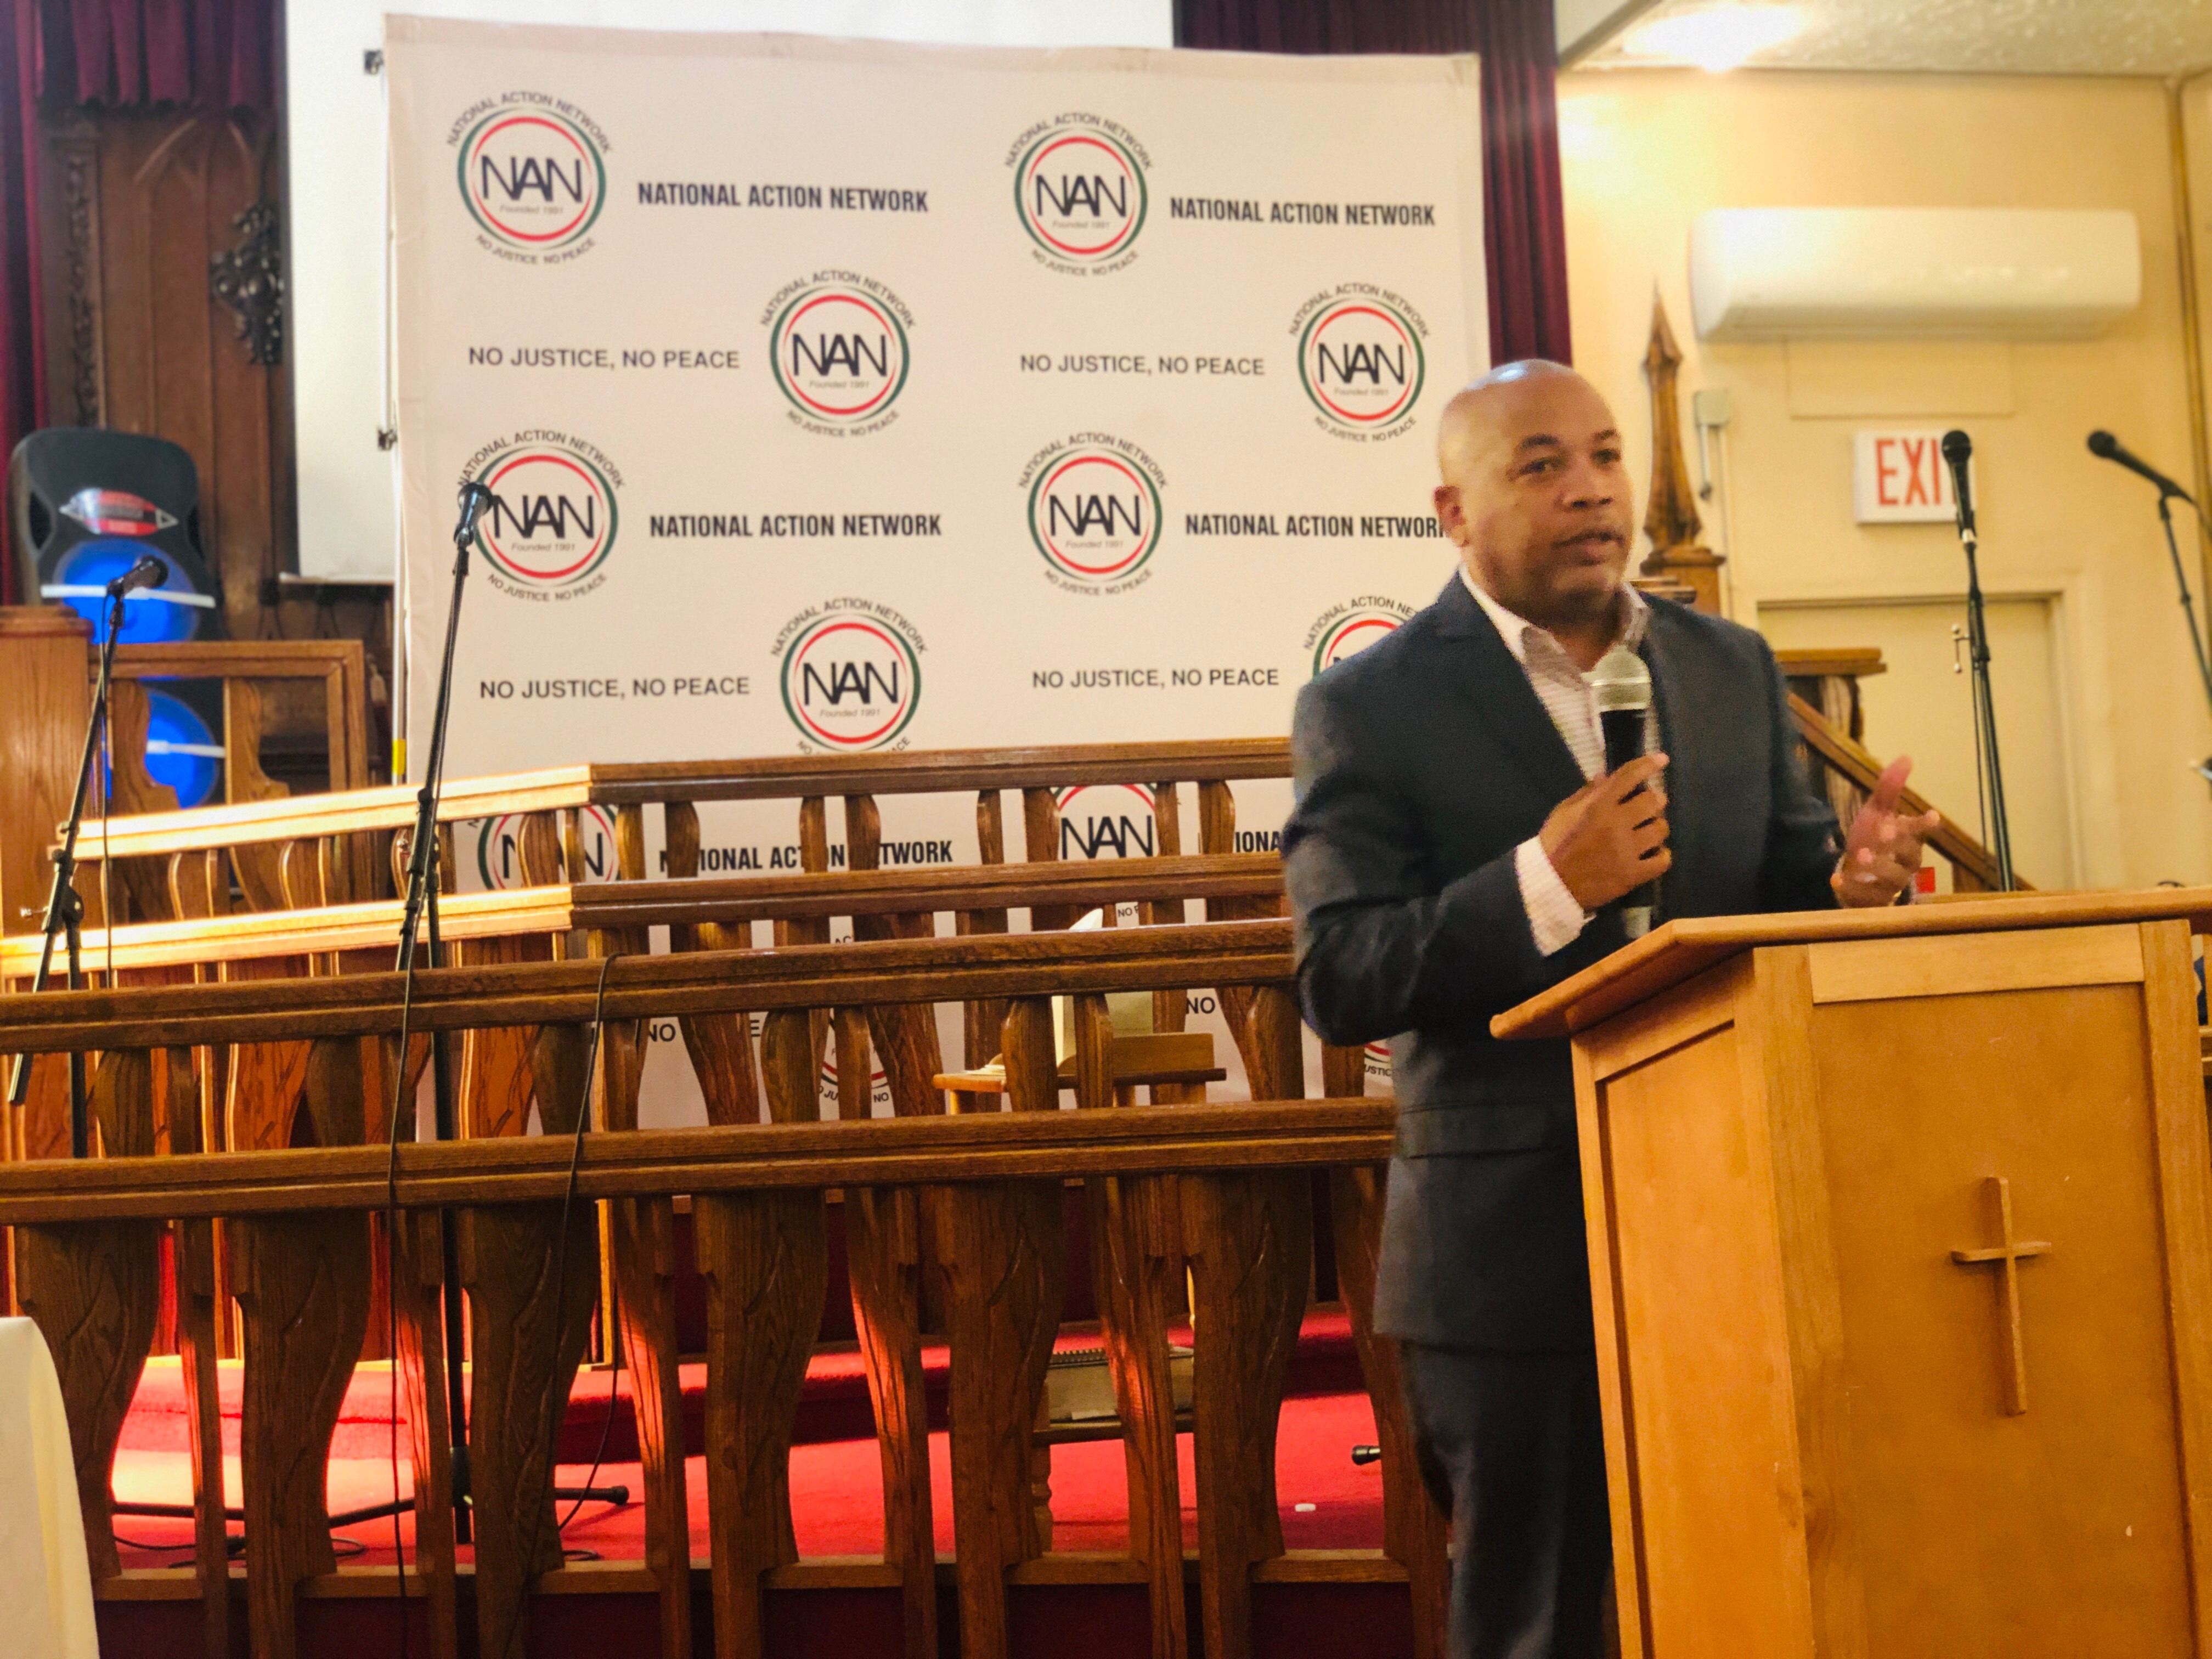 Speaker Heastie attends the National Action Network Bronx Chapter’s Town Hall meeting to discuss community engagement, mental health, affordable housing and other topics in the Bronx community.